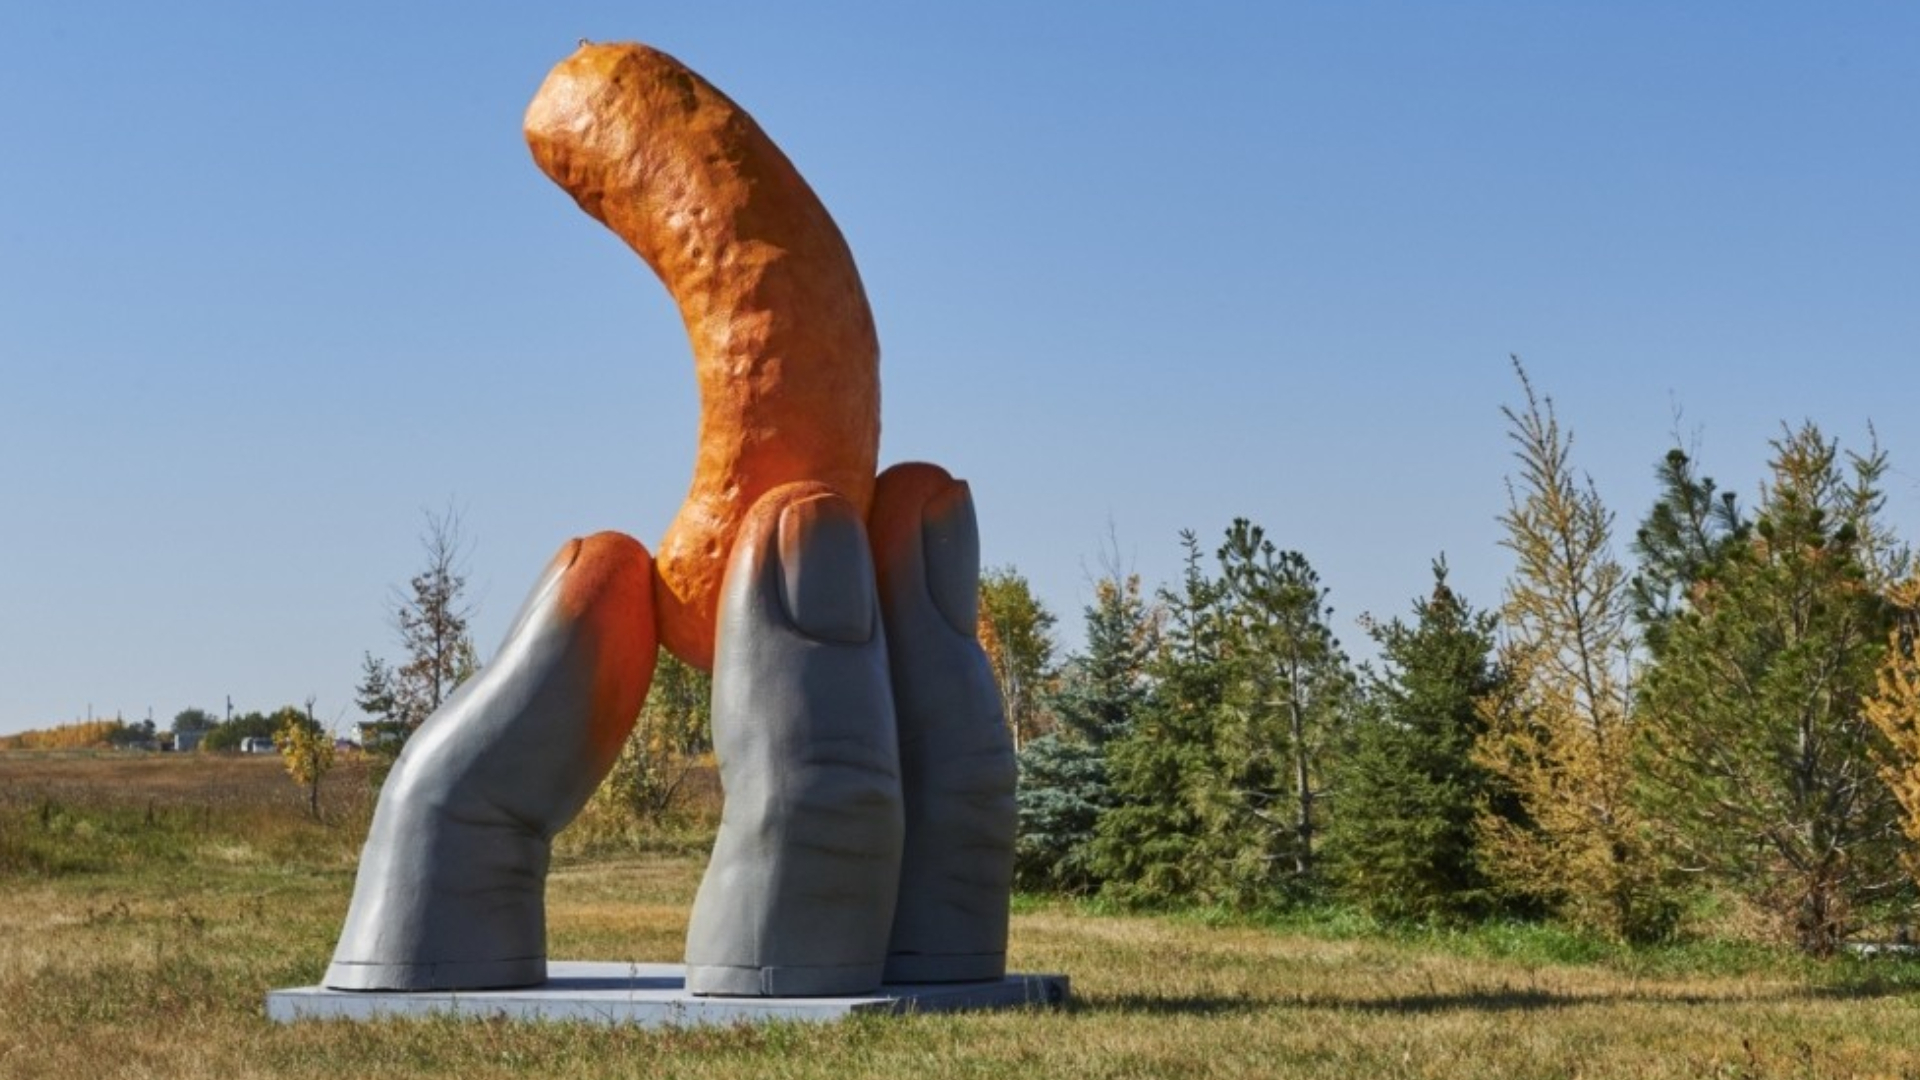 Cheetos reveals 17-foot tall “Cheetle Hand Statue” in Alberta